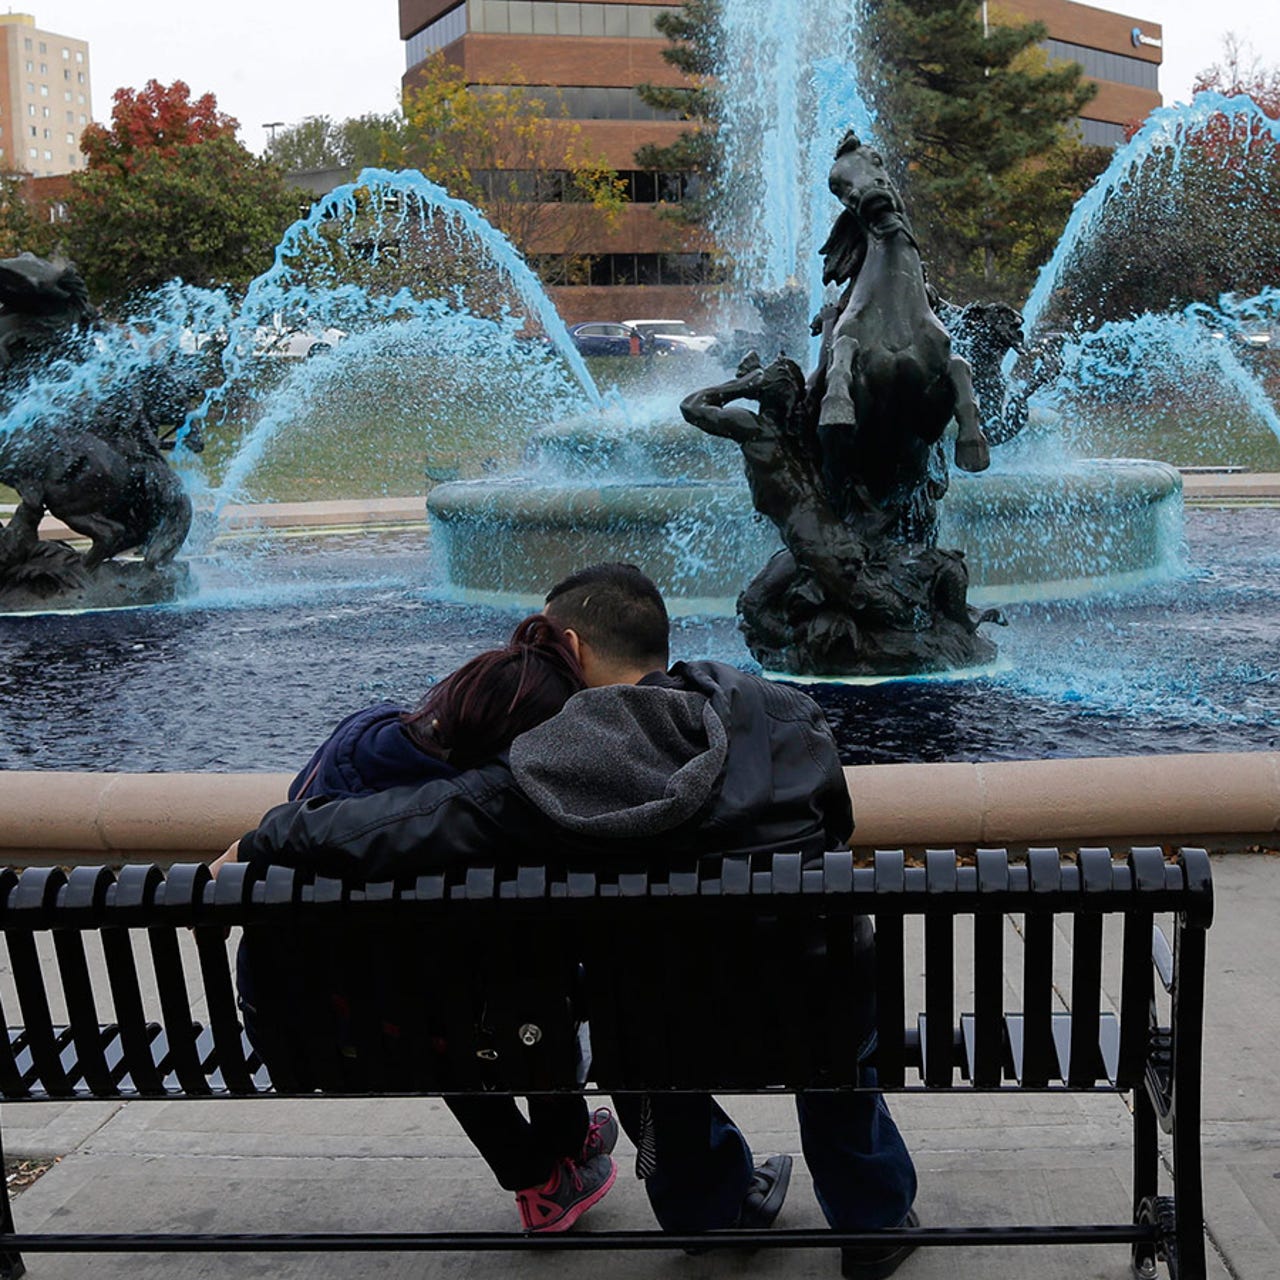 City of Fountains is turning blue for Royals